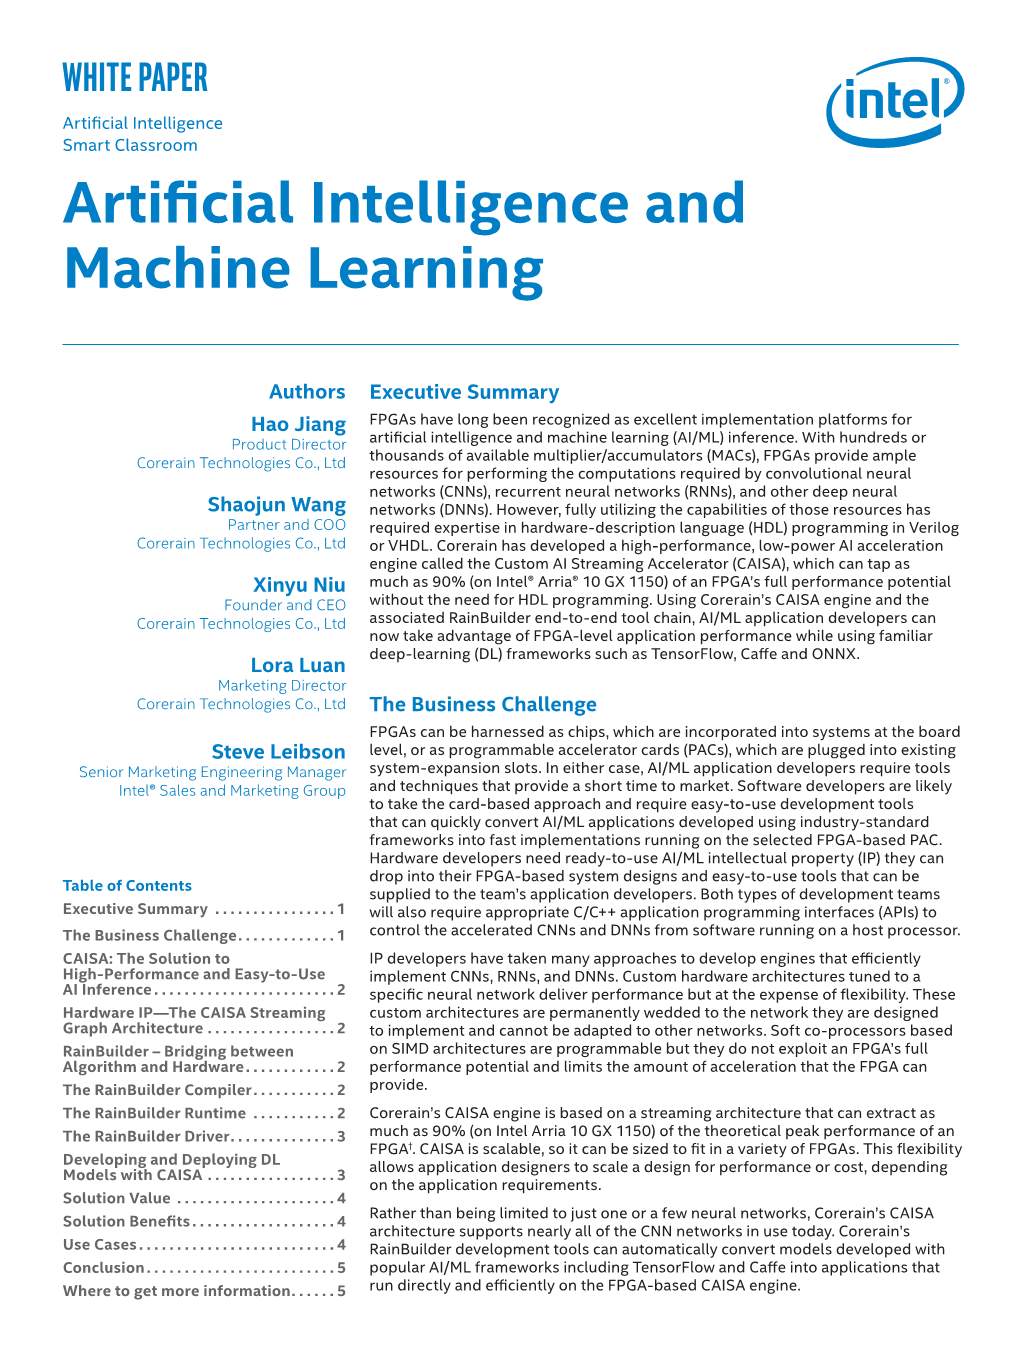 White Paper: Artificial Intelligence and Machine Learning